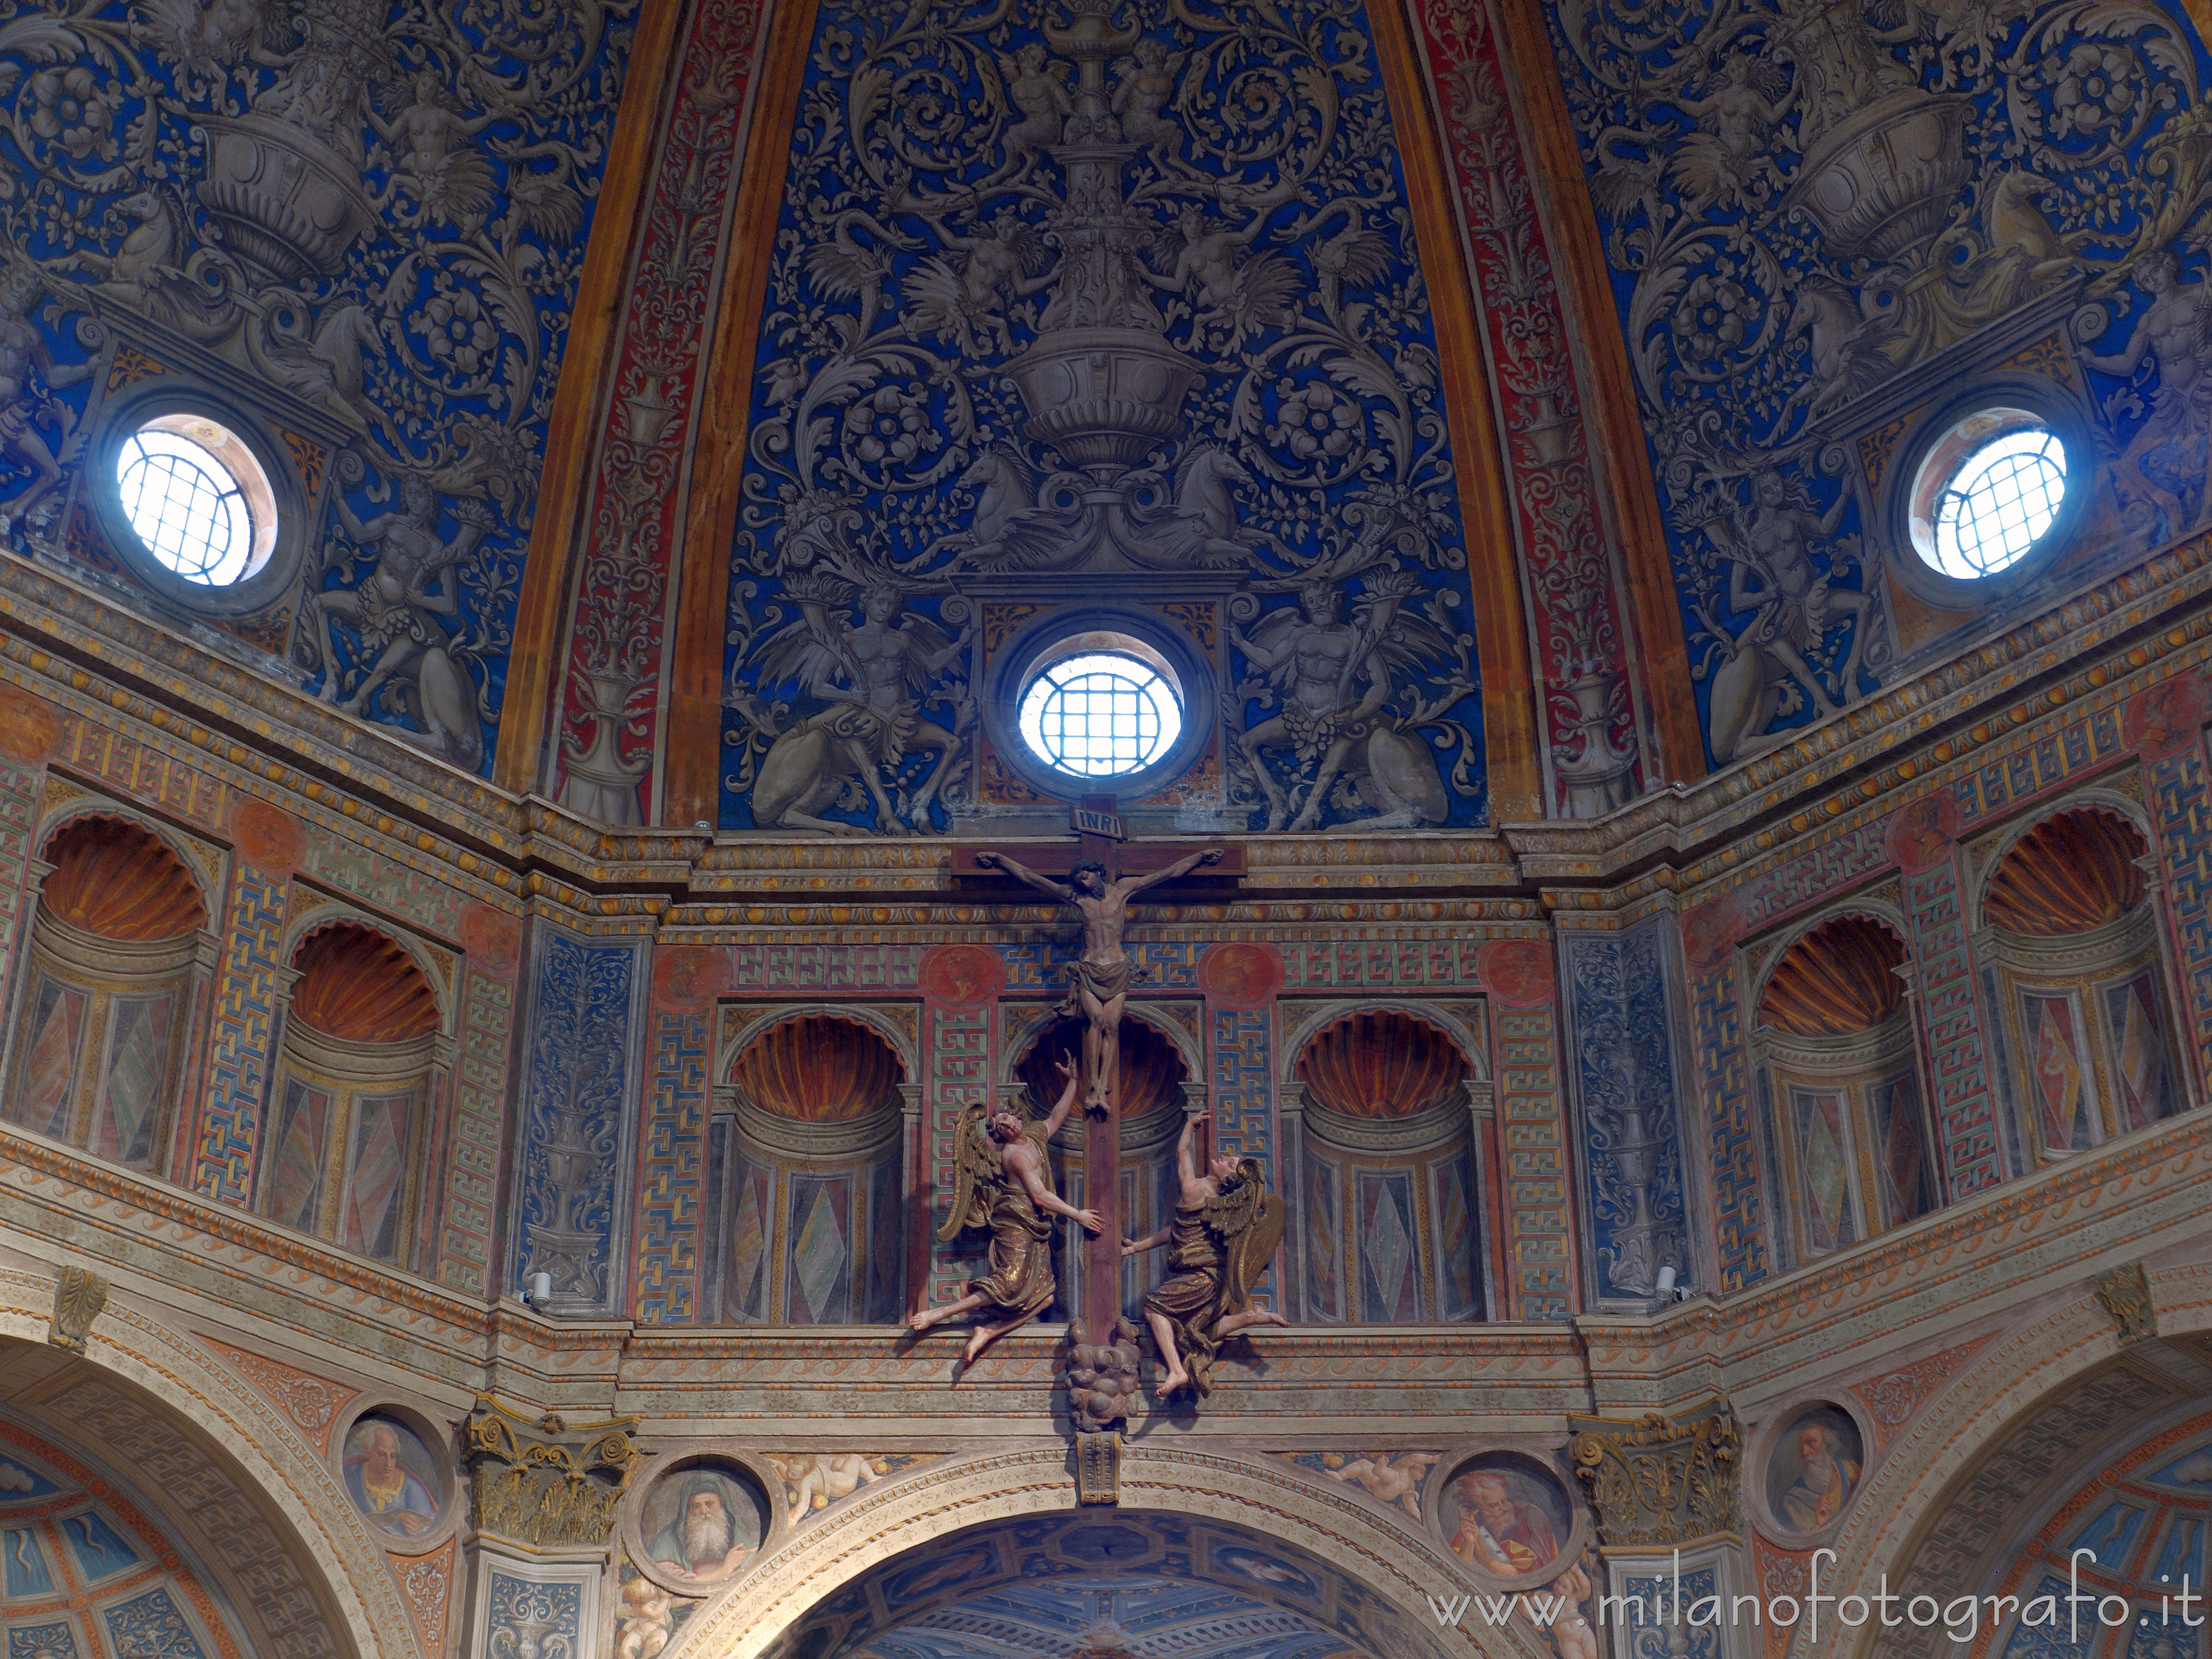 Legnano (Milan, Italy): Crucifix and angels above the entrance to the main chapel of the Basilica of San magno - Legnano (Milan, Italy)